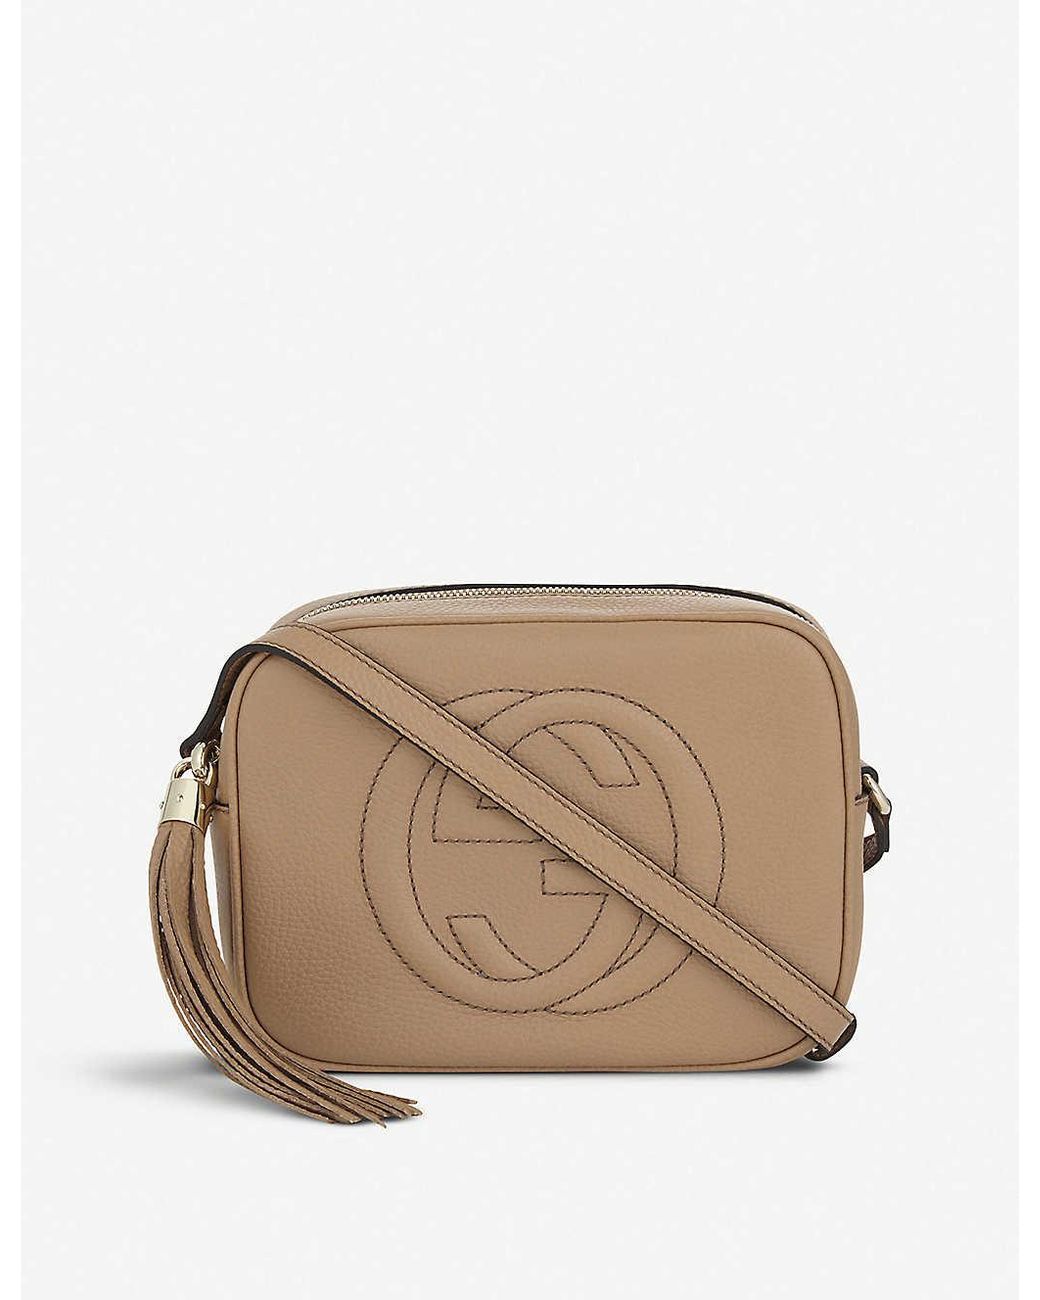 Gucci Soho Leather Disco Cross-body Bag in Natural | Lyst